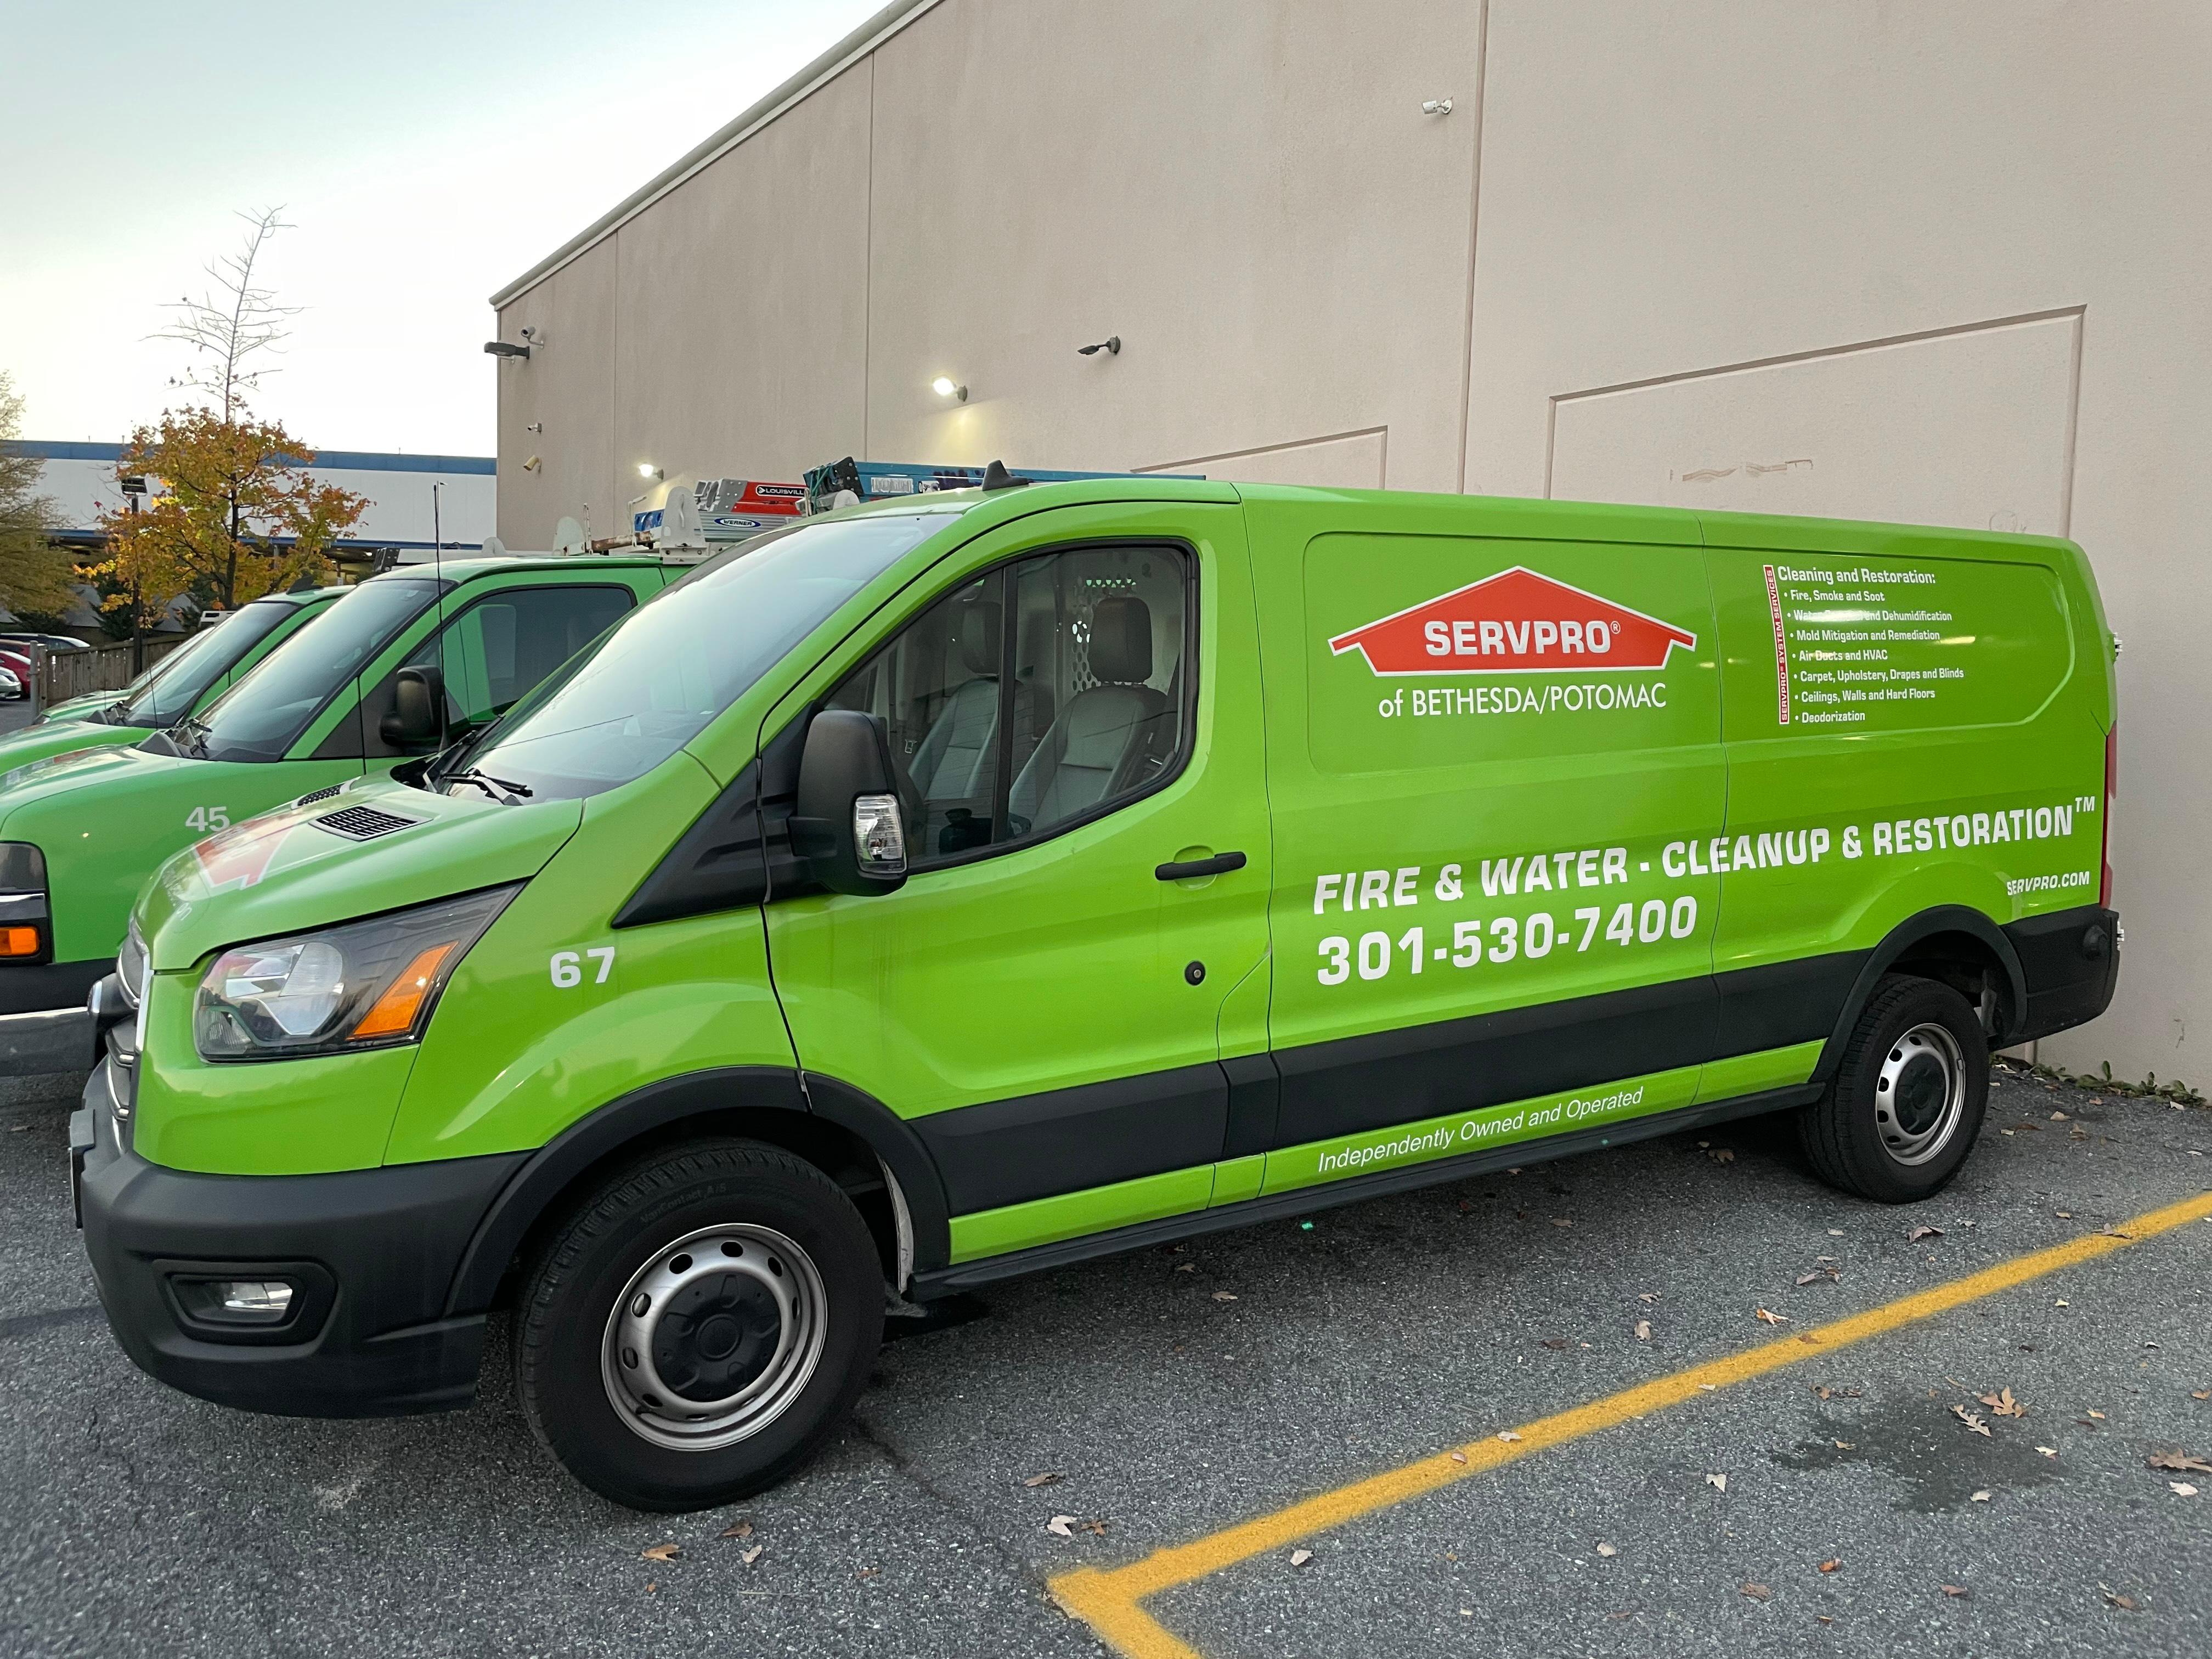 A SERVPROÂ® emergency response vehicle parked outside of the storefront.